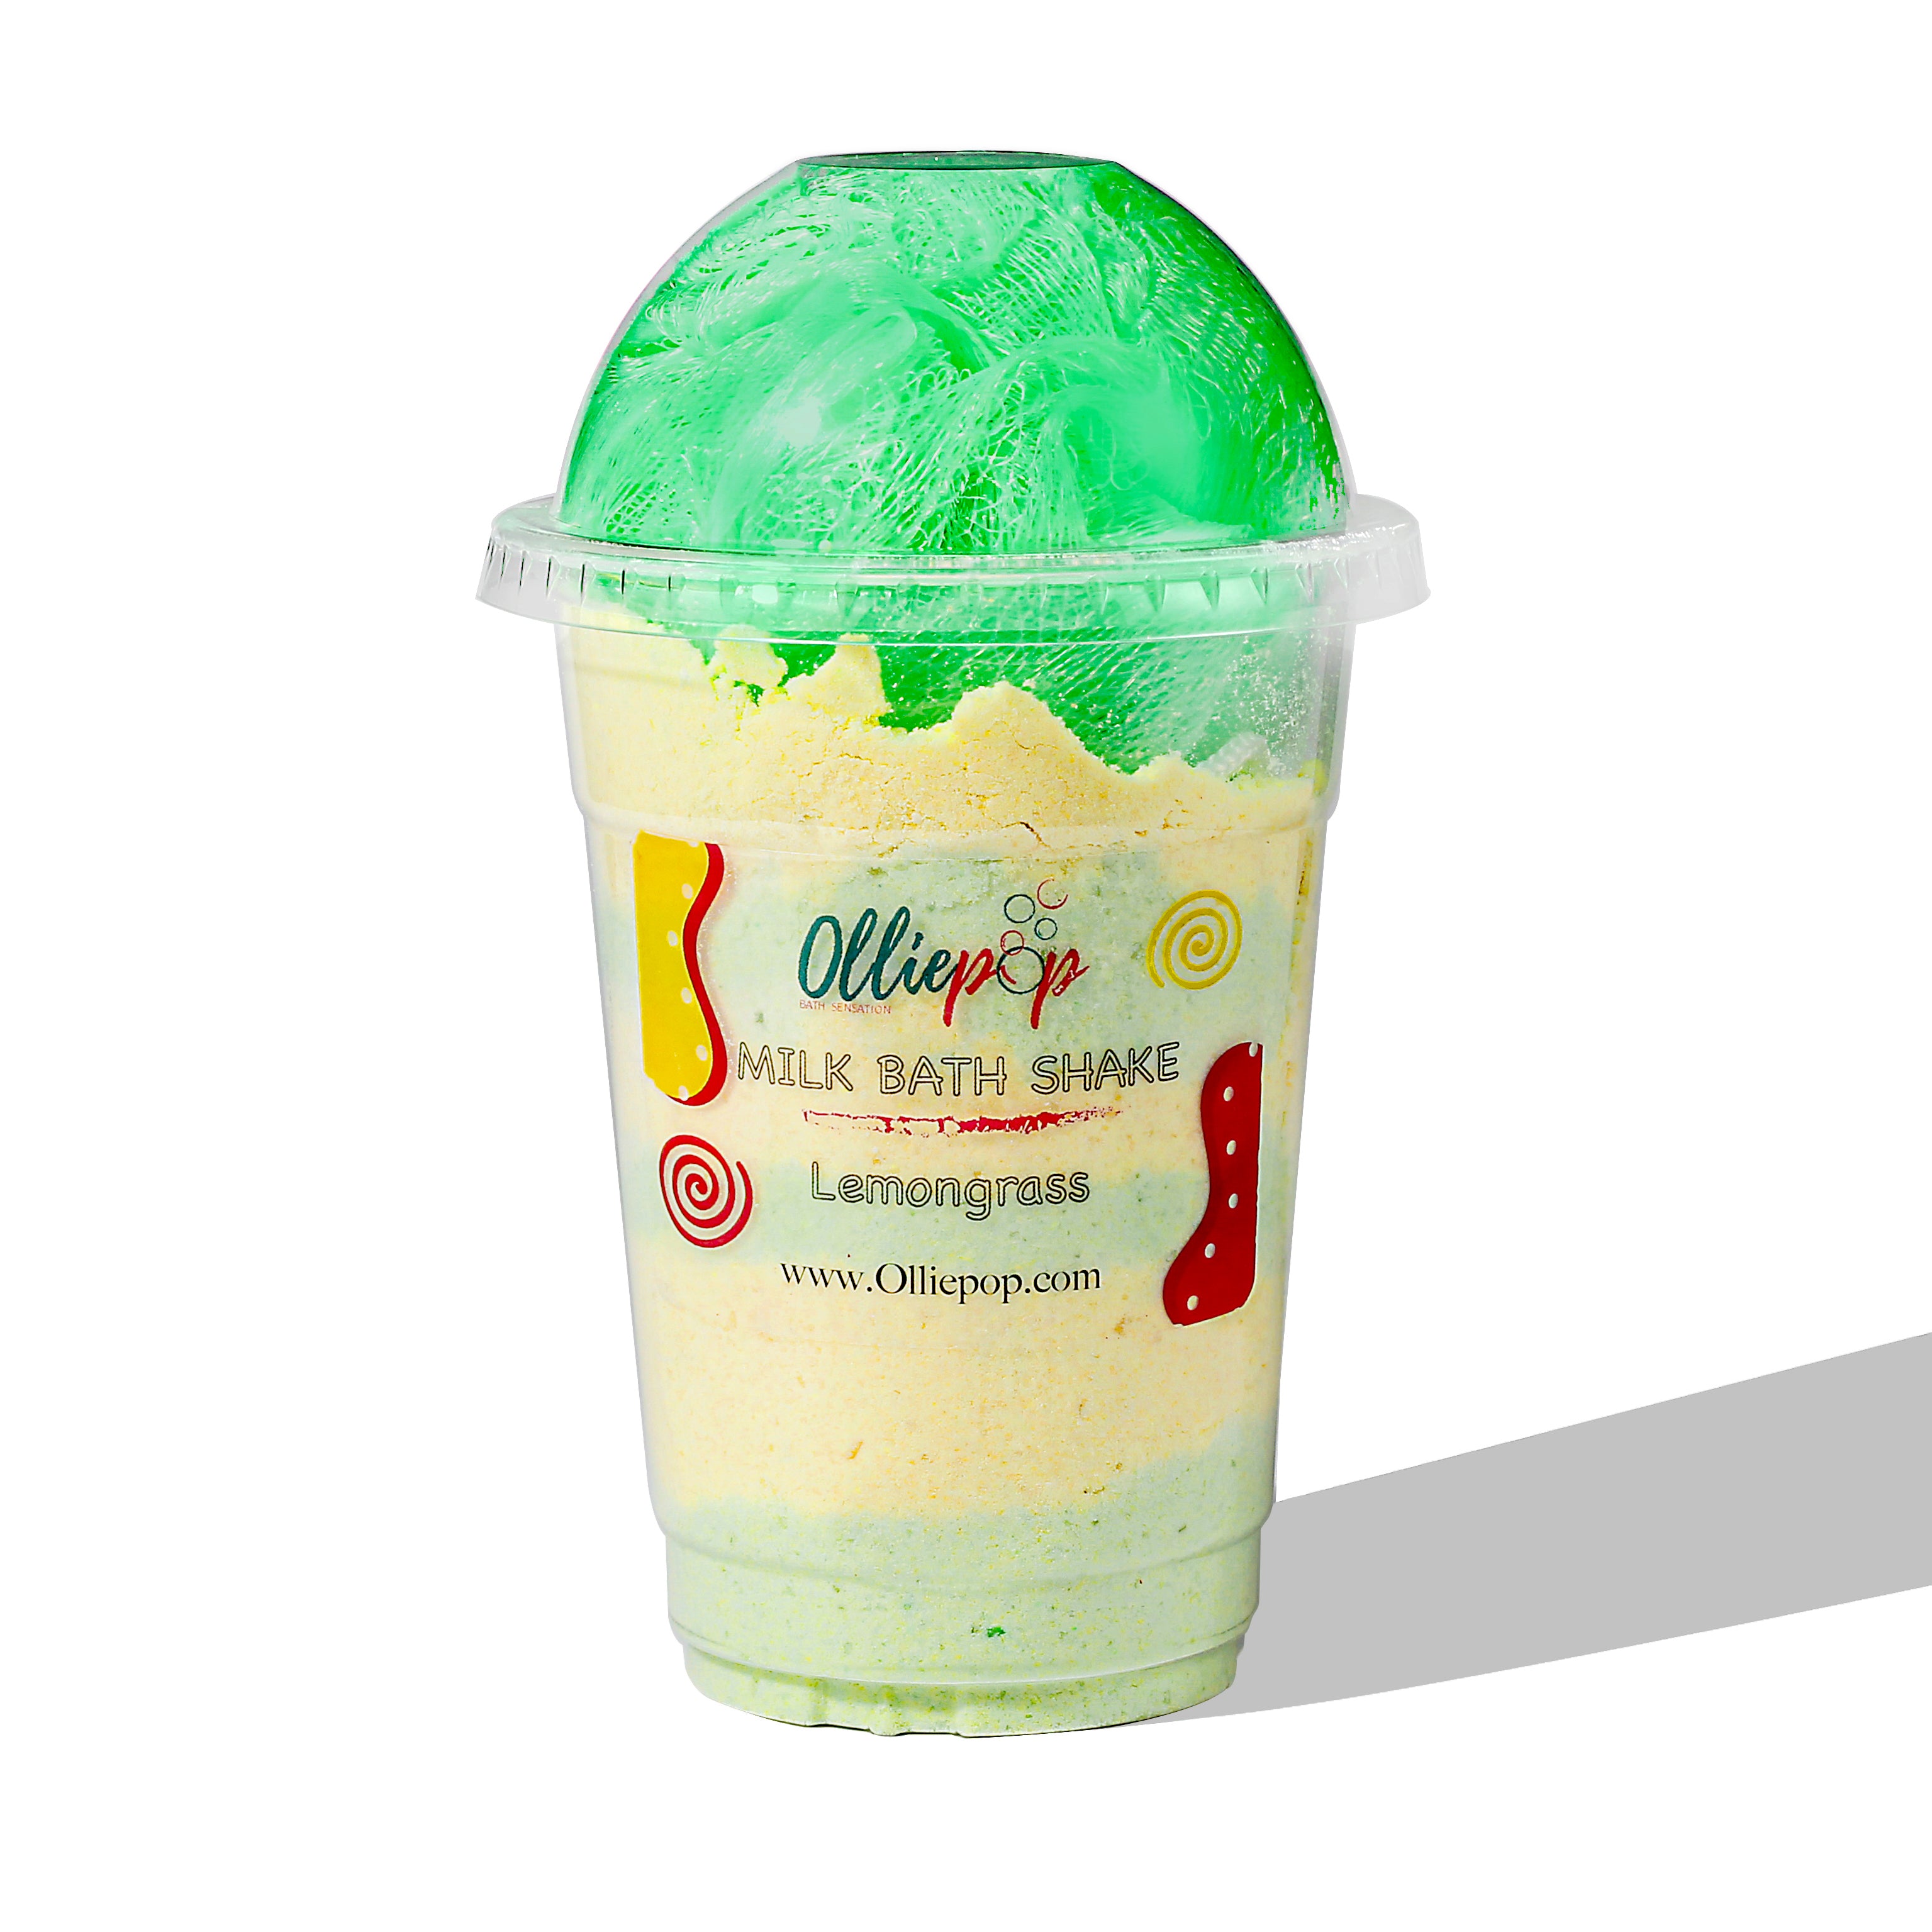 Plastic milkshake cup with light yellow milk bath soak inside. Green loofah on top with a dome lid.